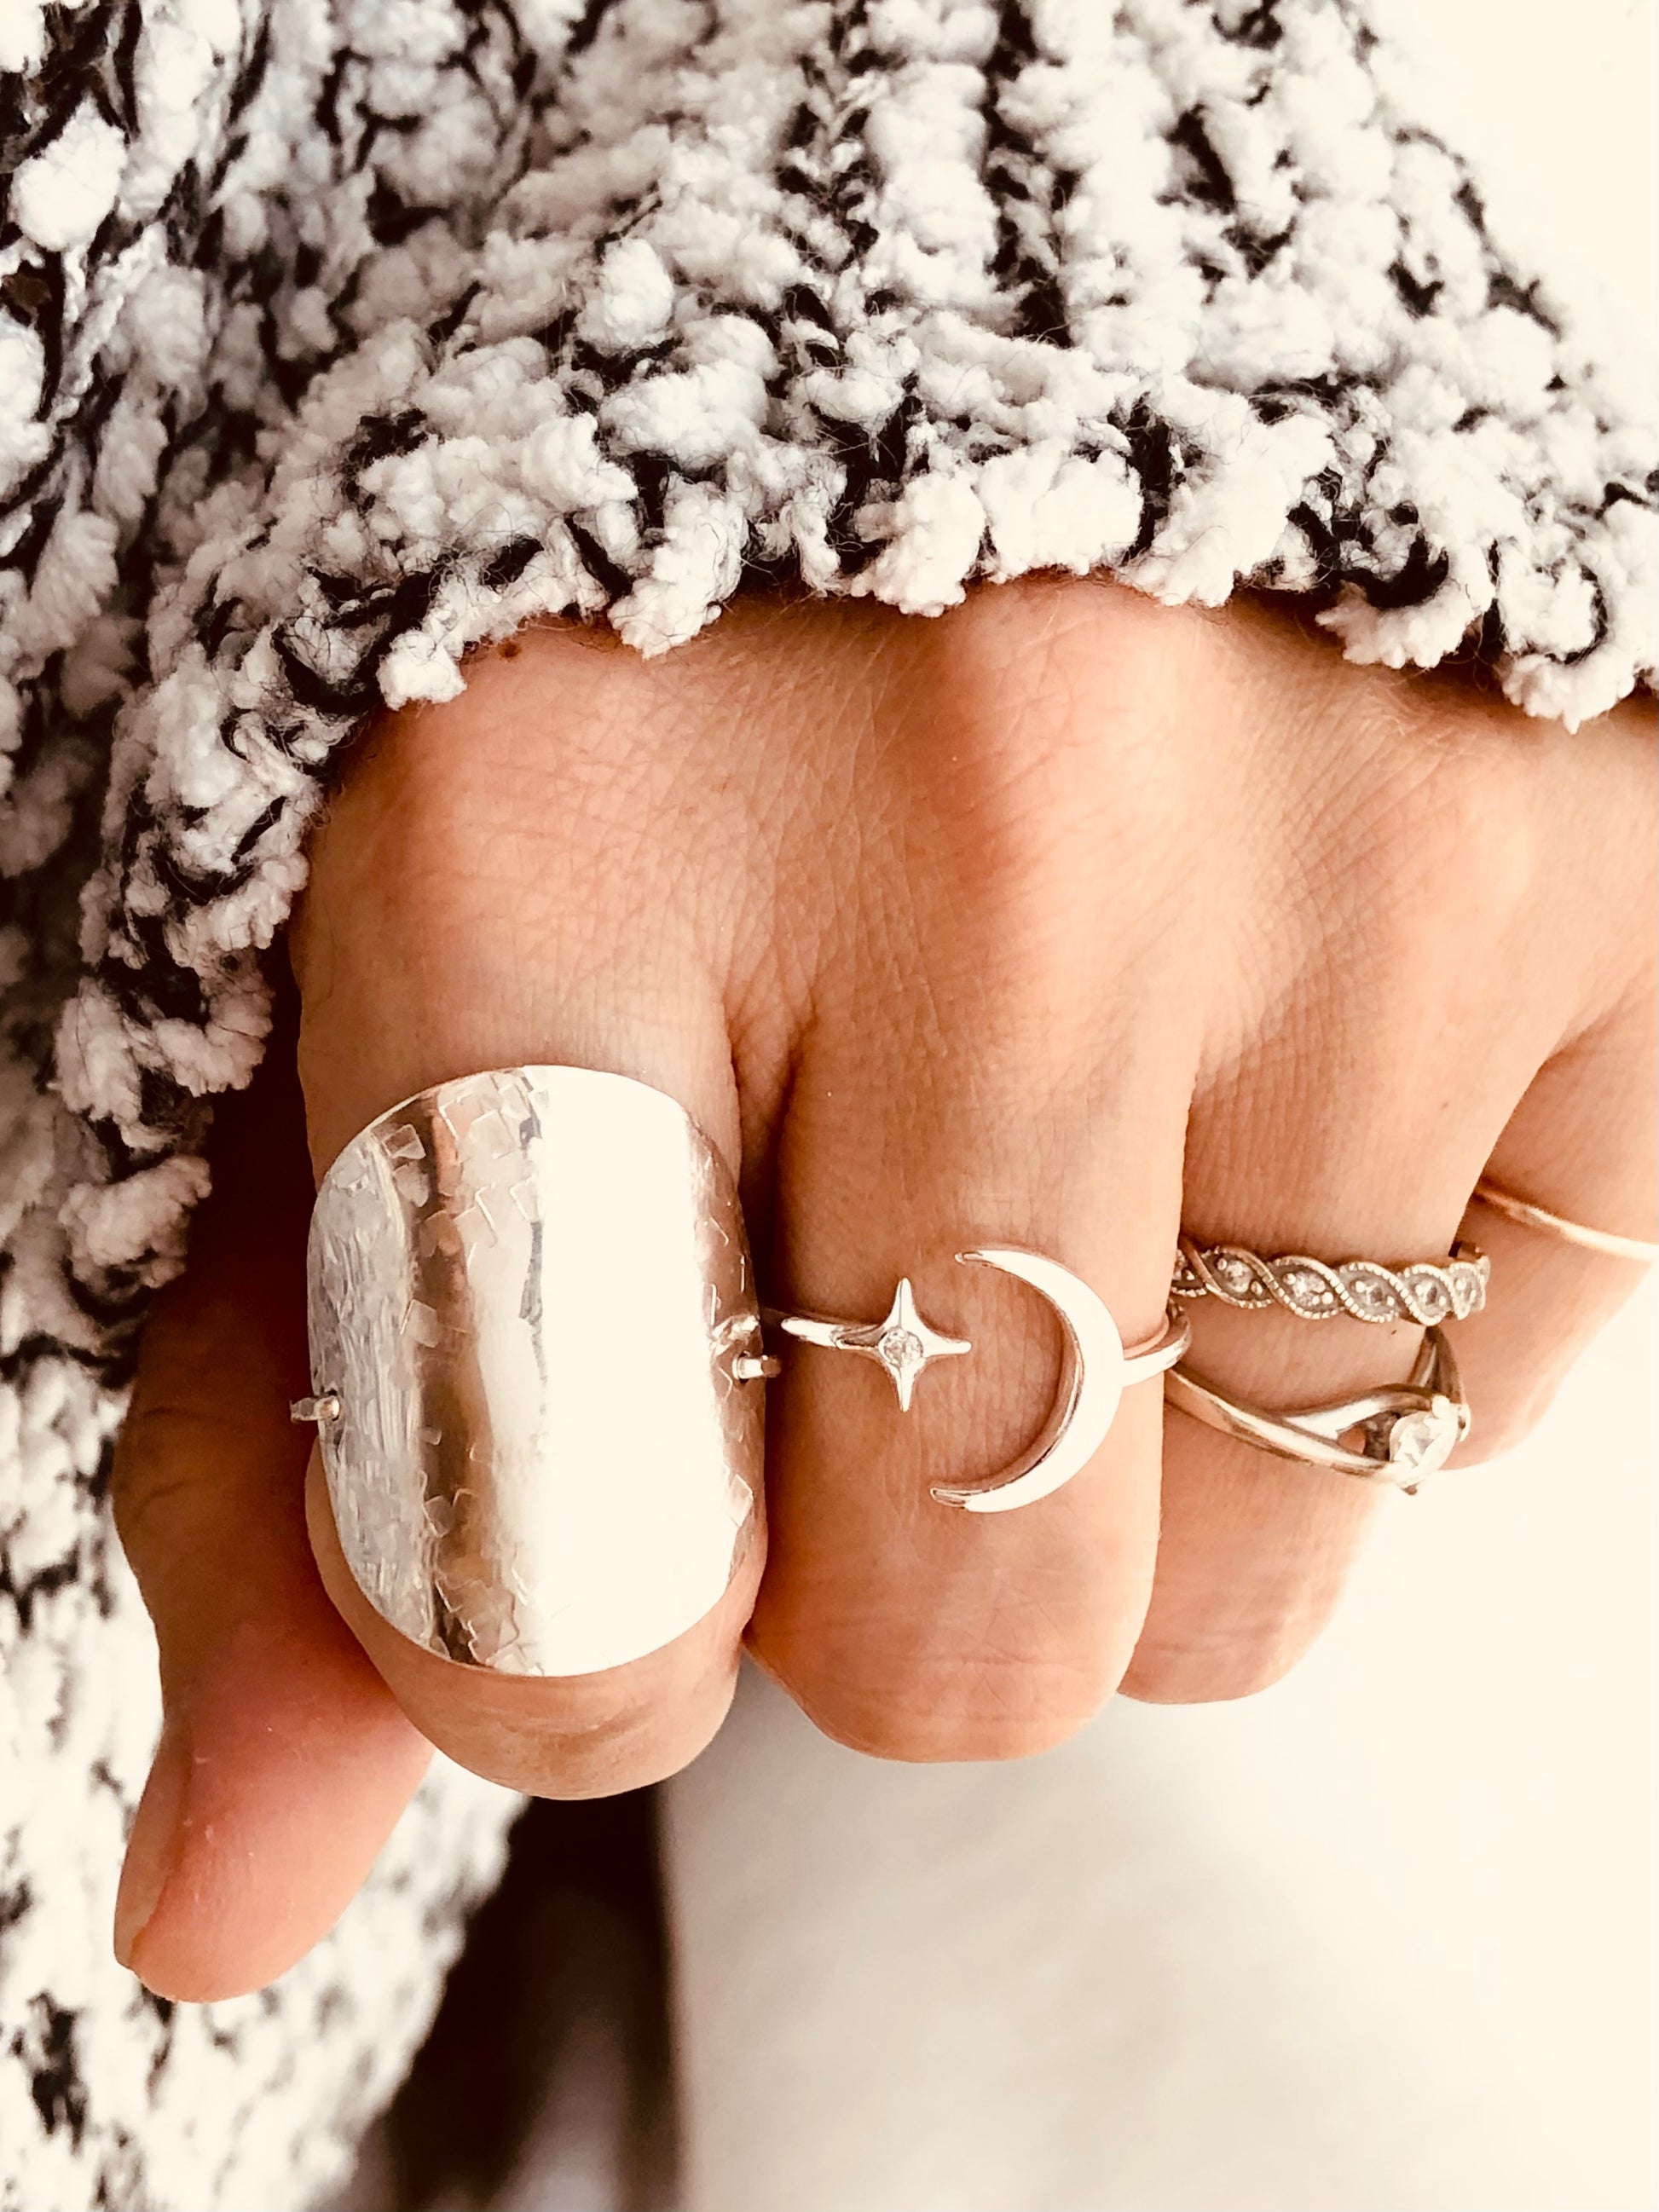 Large Disc Ring, Sterling Silver Disc Ring, Textured Disc Ring, Wide Band,Statement Ring, Disc Ring, Silver Ring, Mothers Gift, Gift For Her, Sterling Silver Large Disc Ring